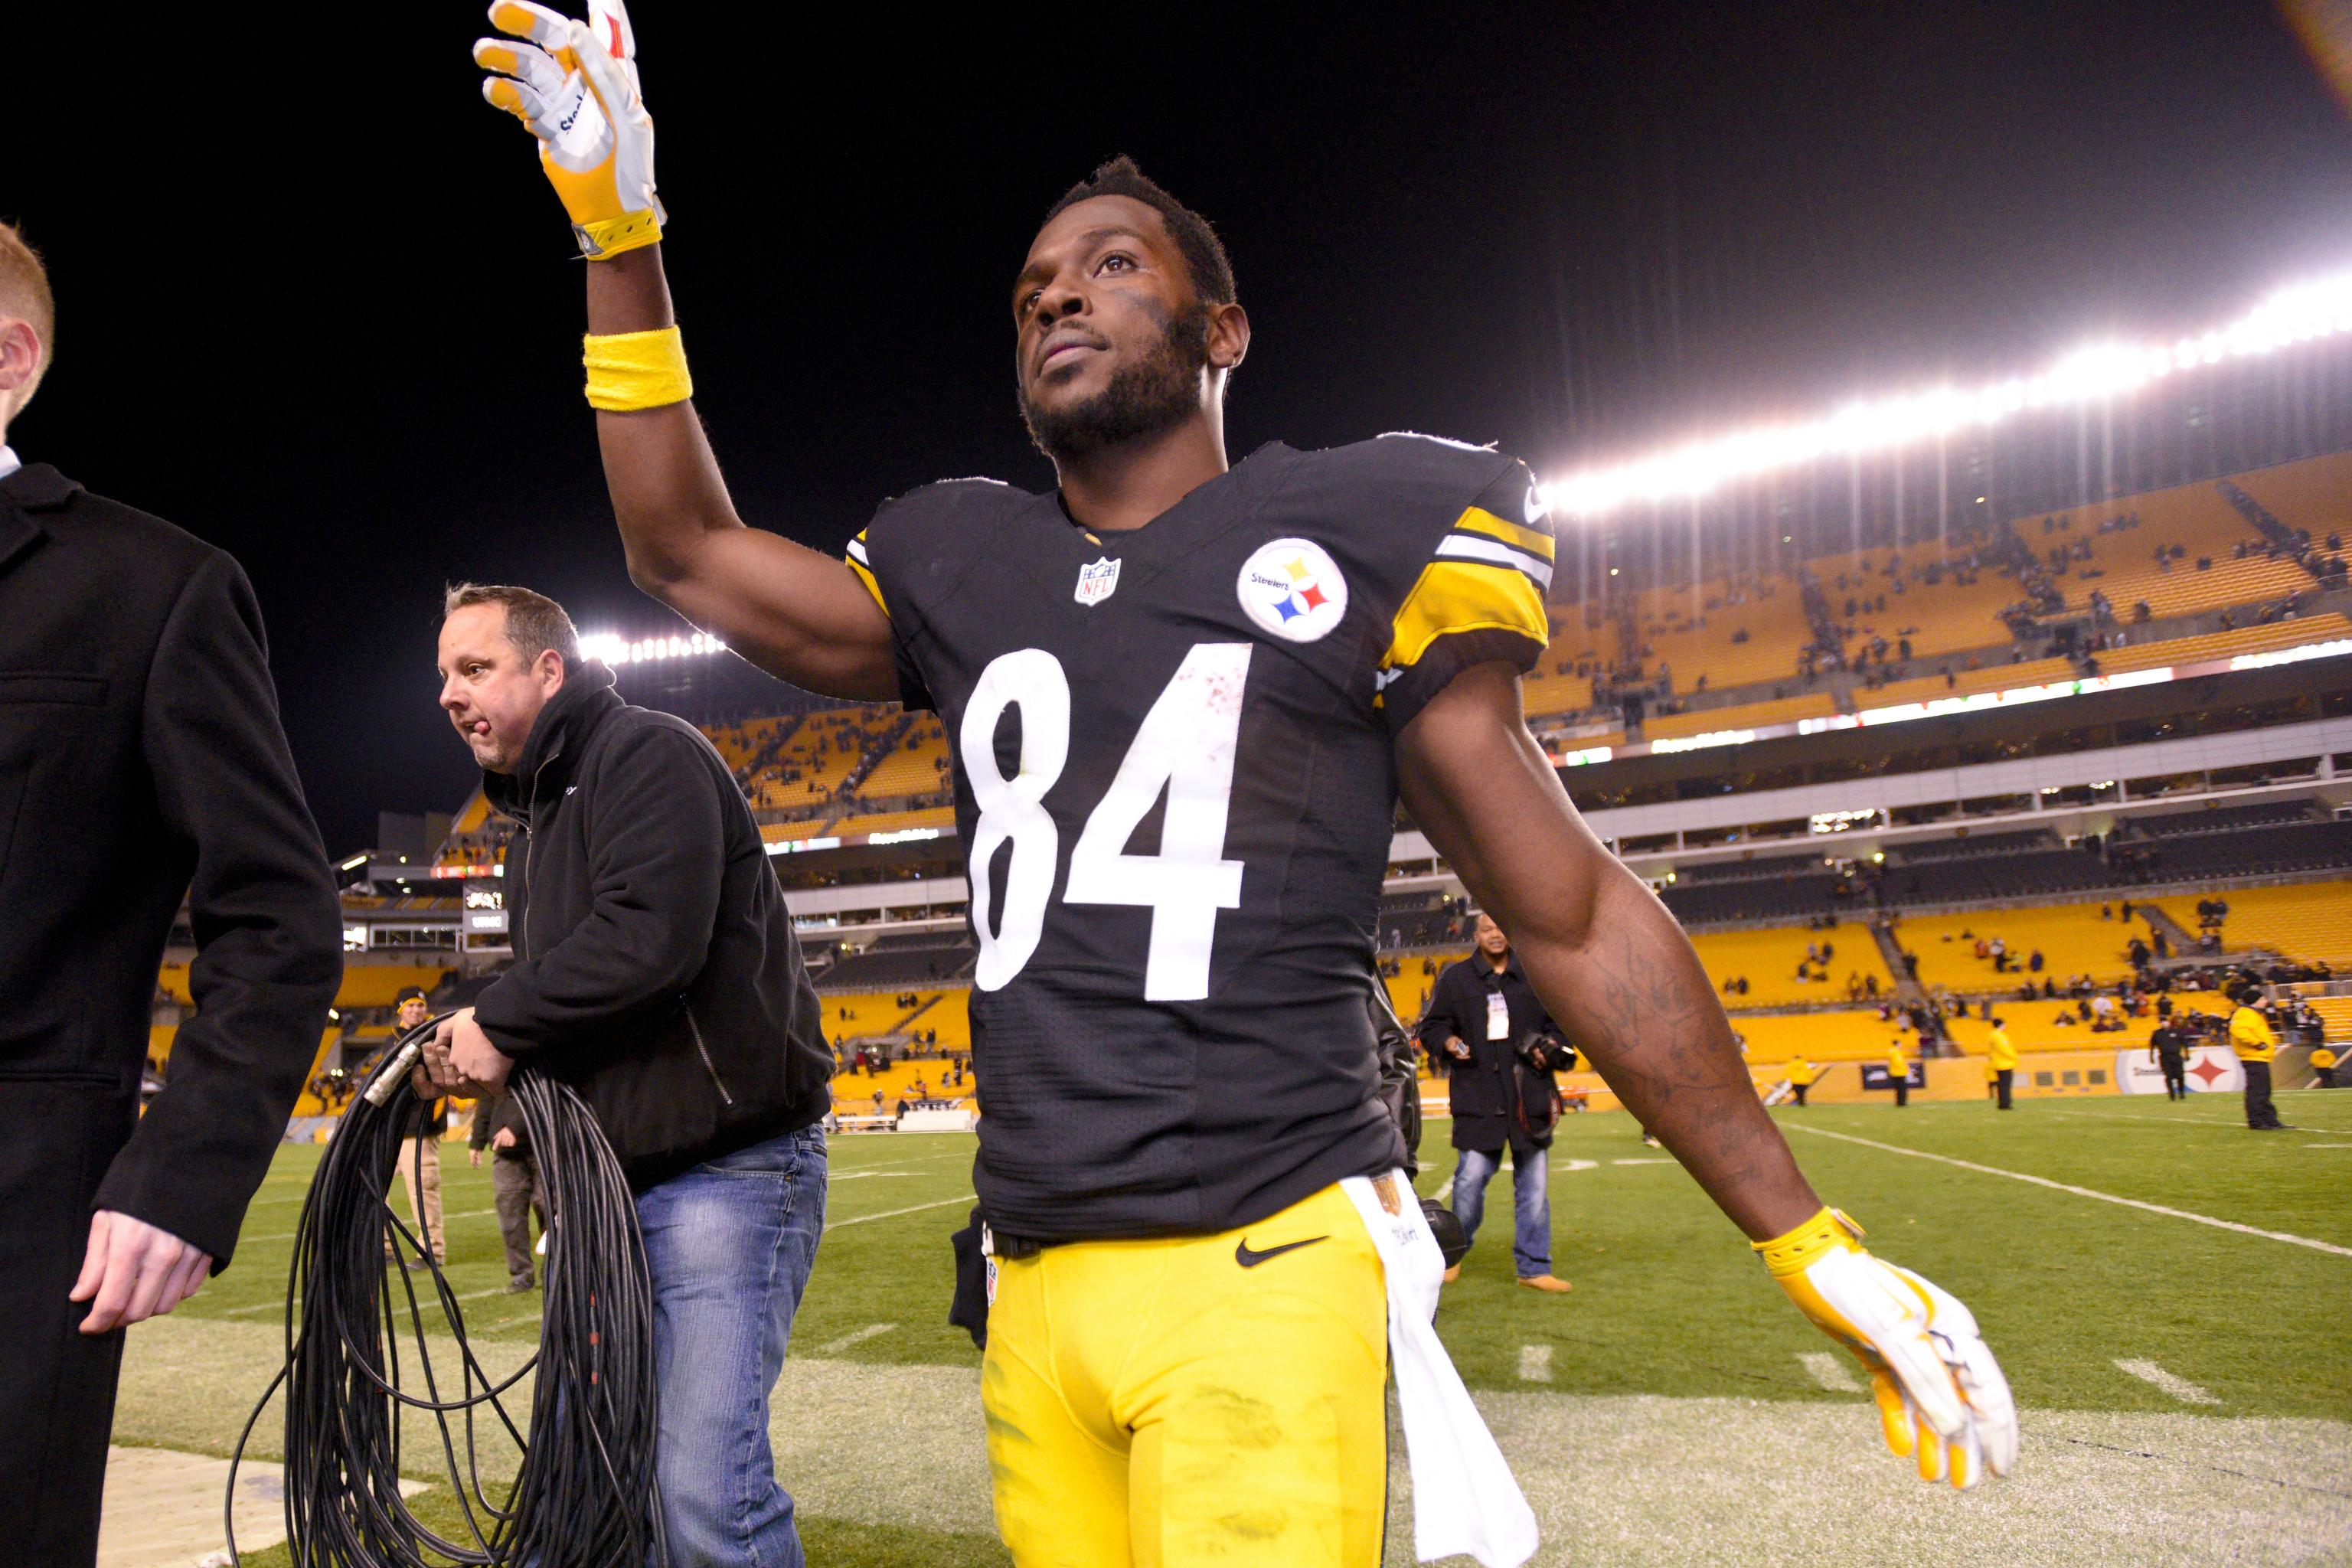 It seems like Antonio Brown is trying to get fired by the Steelers